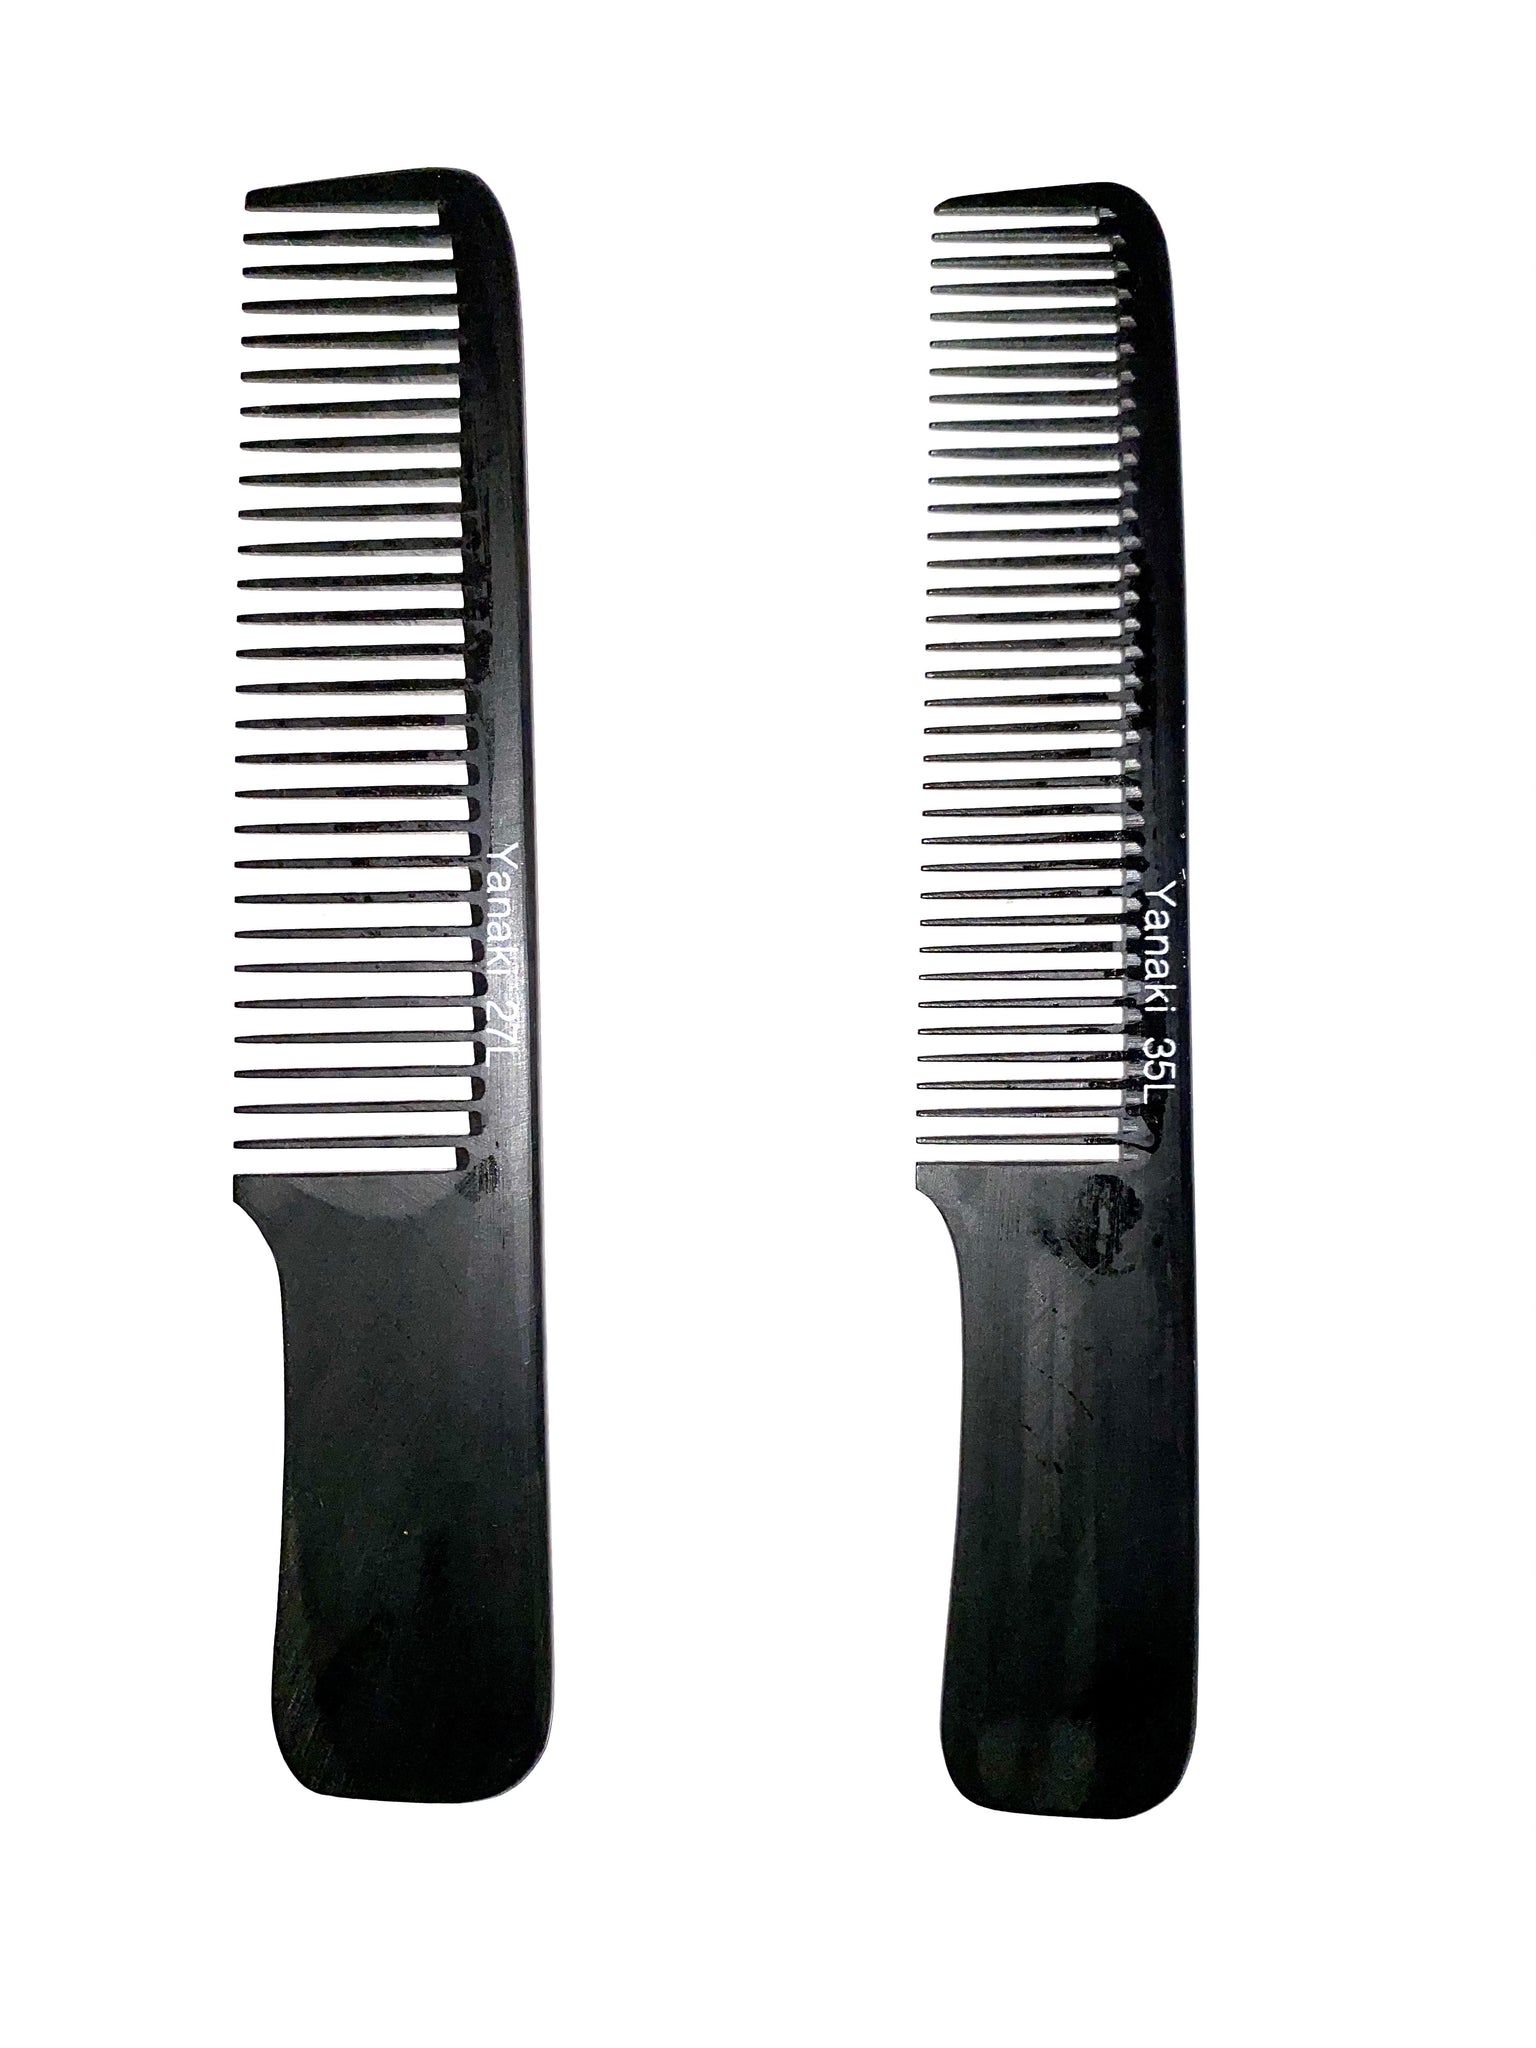 YANAKI COMBS (Hand-Crafted Japanese Combs) $22.00